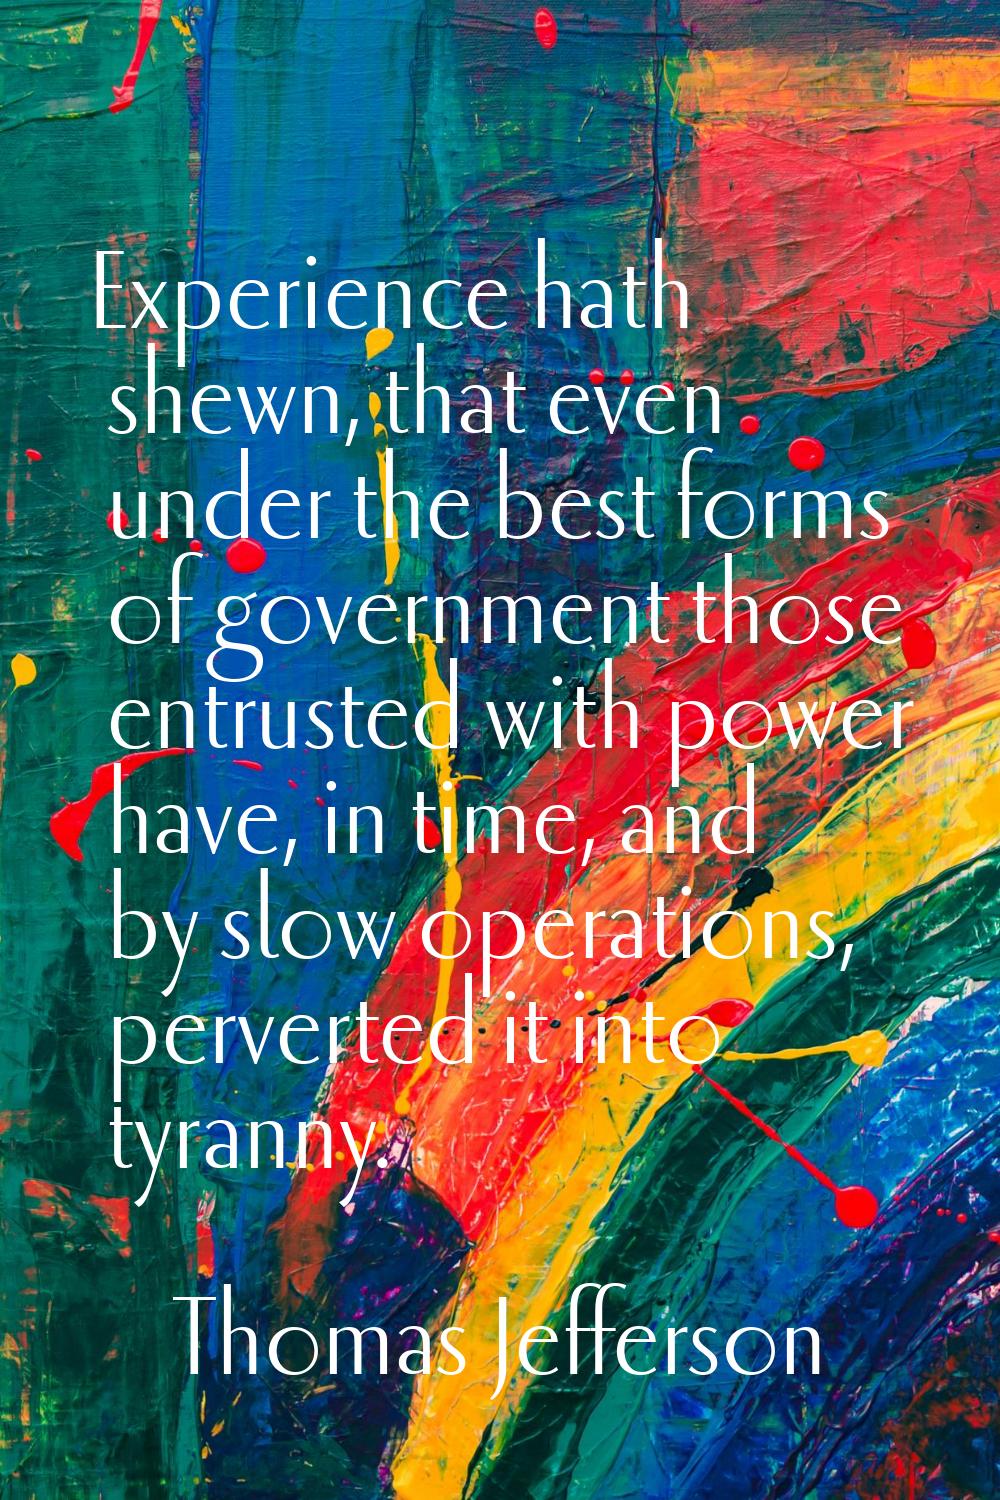 Experience hath shewn, that even under the best forms of government those entrusted with power have